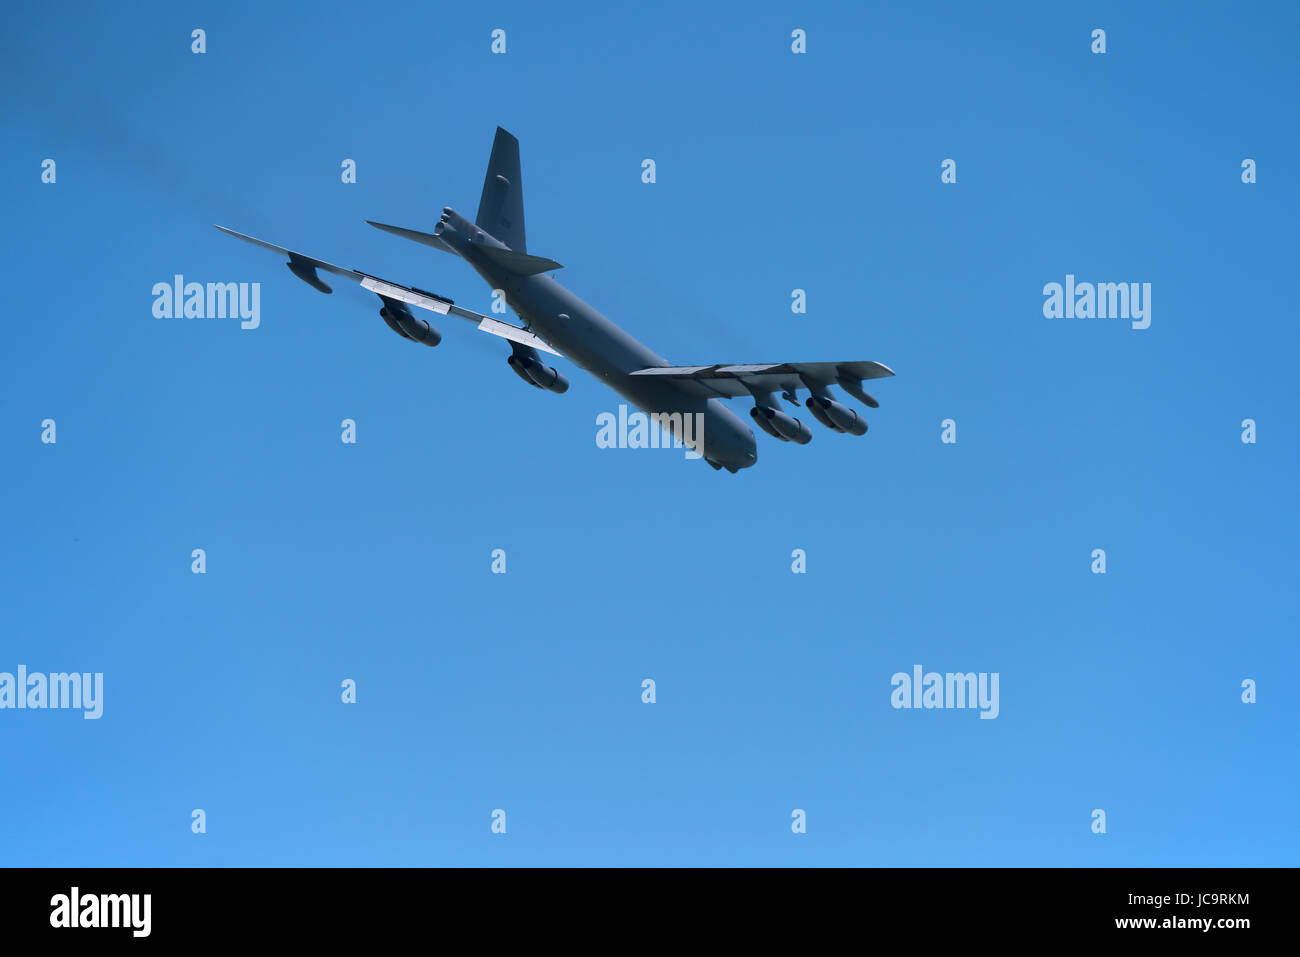 BOSSIER CITY, LOUISIANA, U.S.A.-APRIL 6, 2017: A U.S. Air Force B 52 bomber, assigned to the Air Force Global Strike Command's Eighth Air Force. Stock Photo